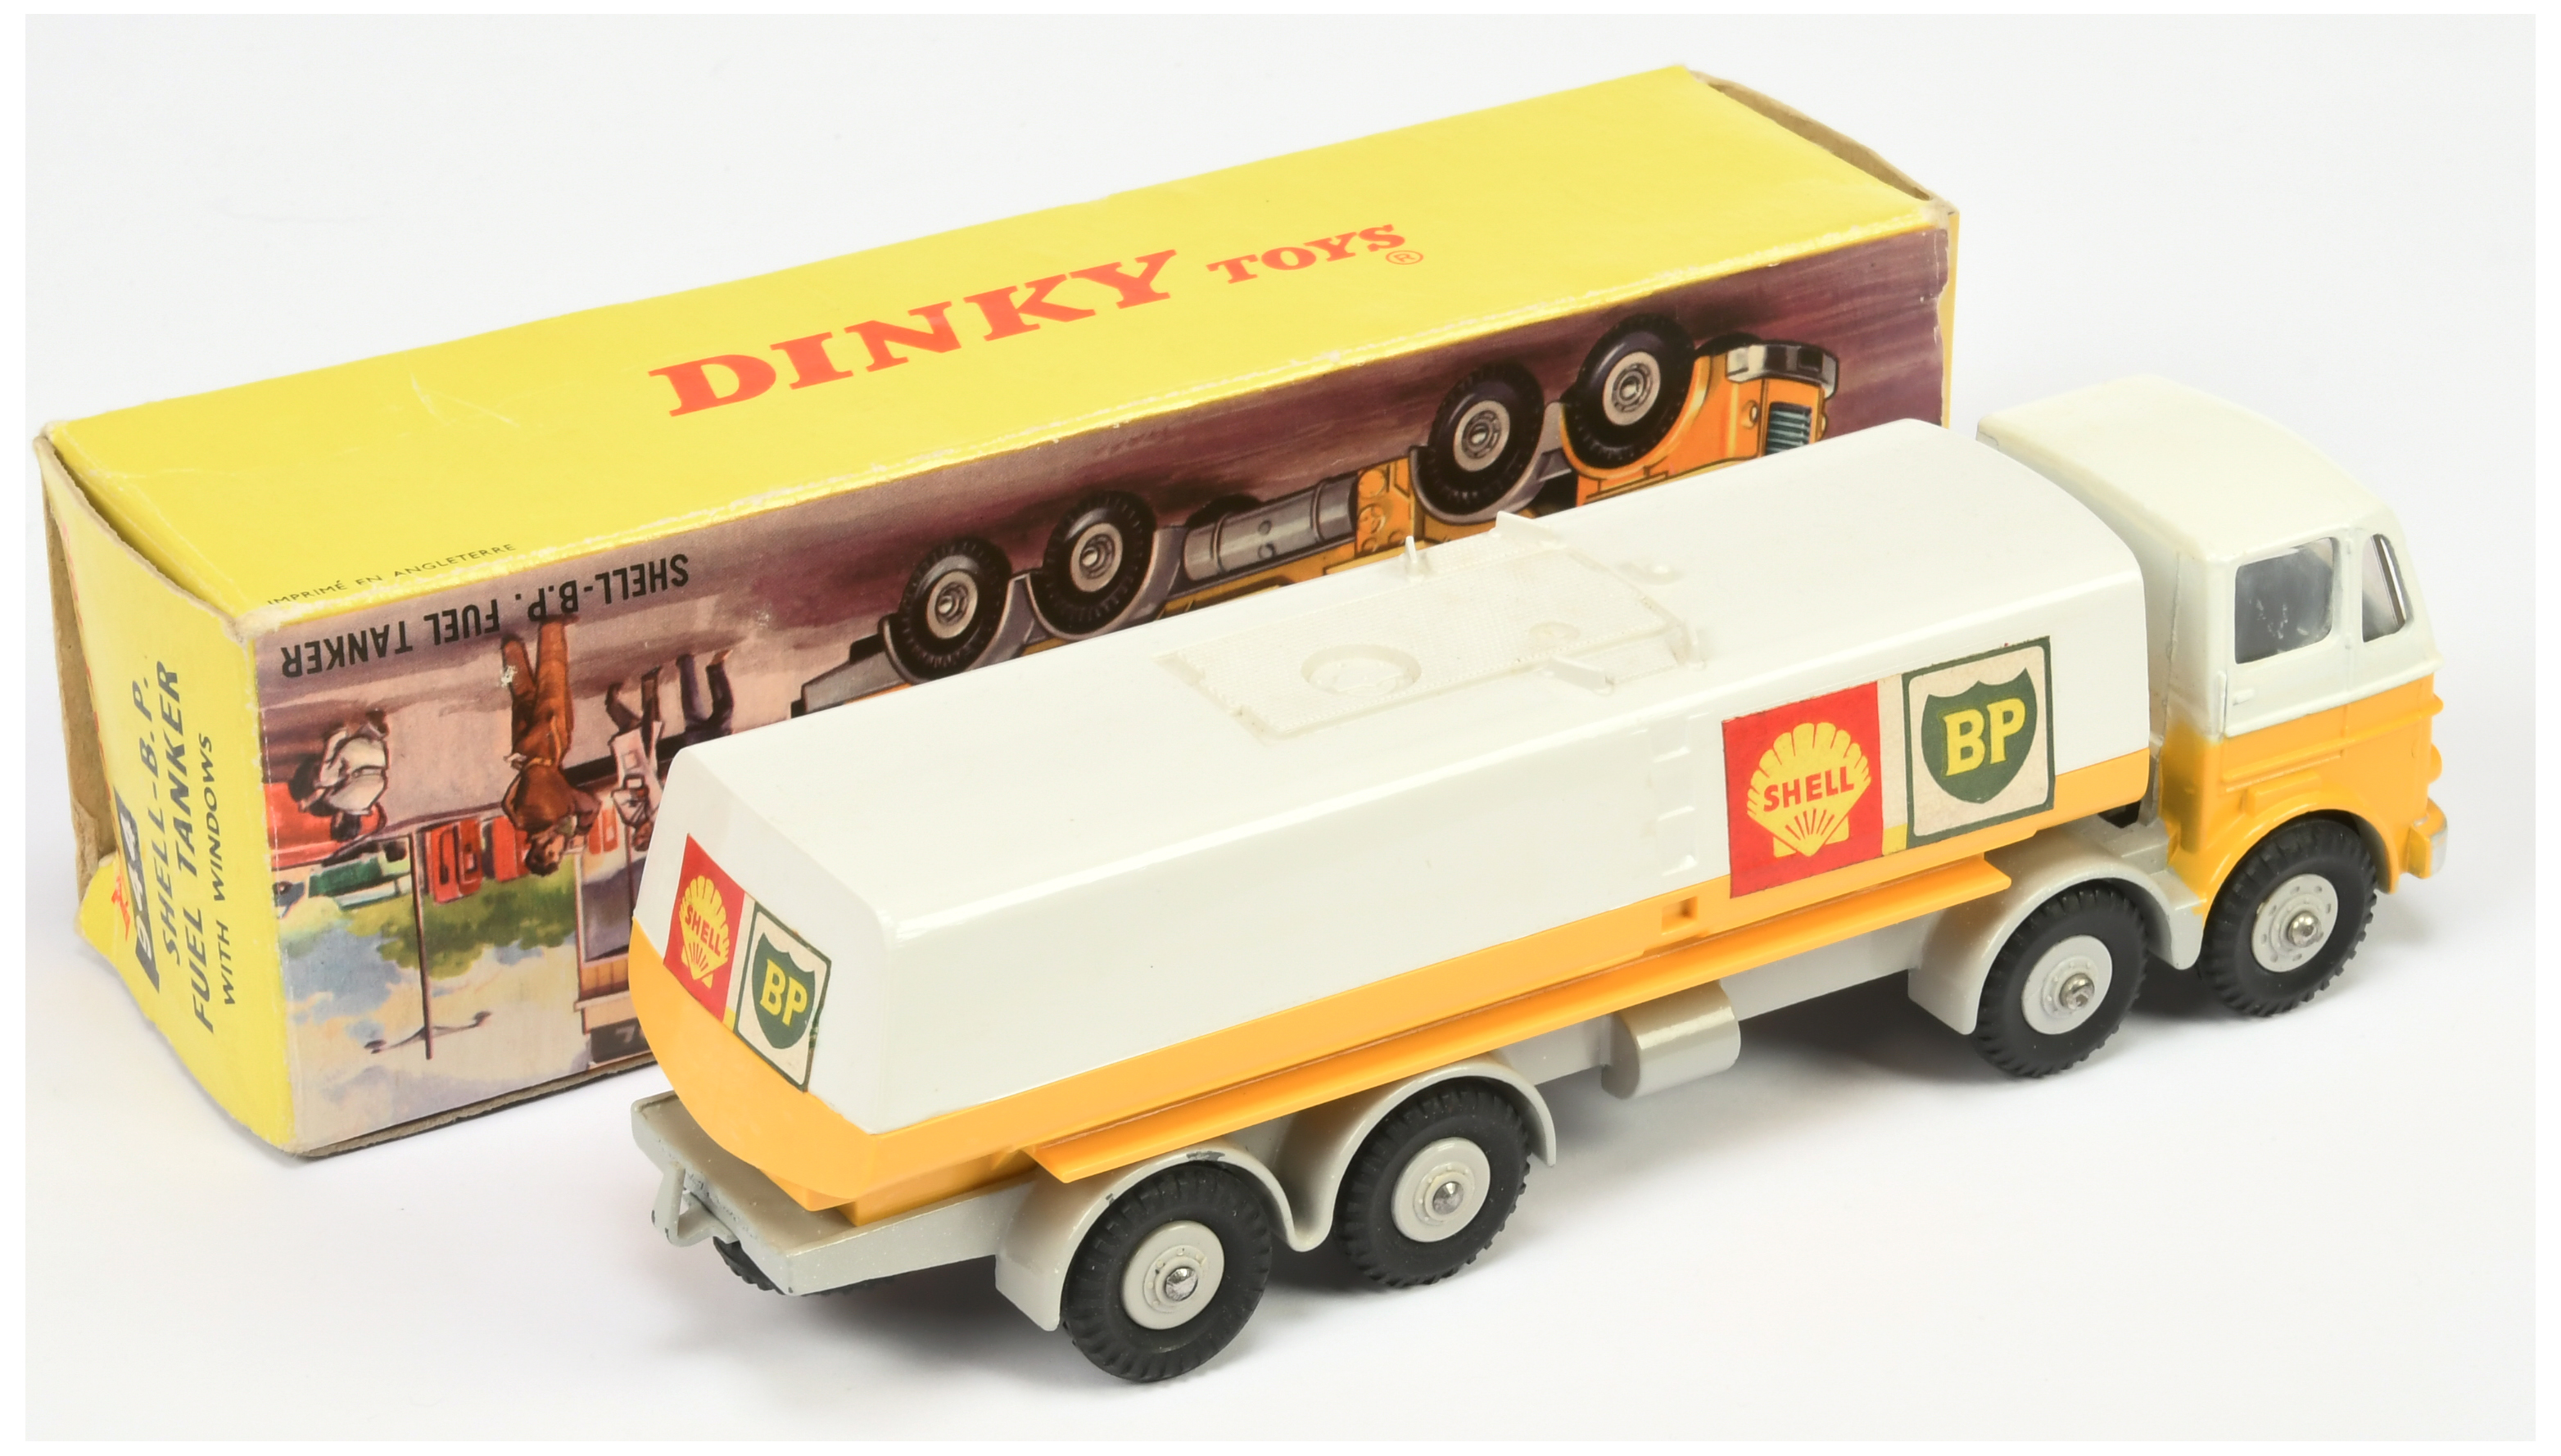 Dinky Toys 944 Leyland Octopus Tanker "Shell-BP" - yellow, white including Tanker, grey chassis a... - Image 2 of 2